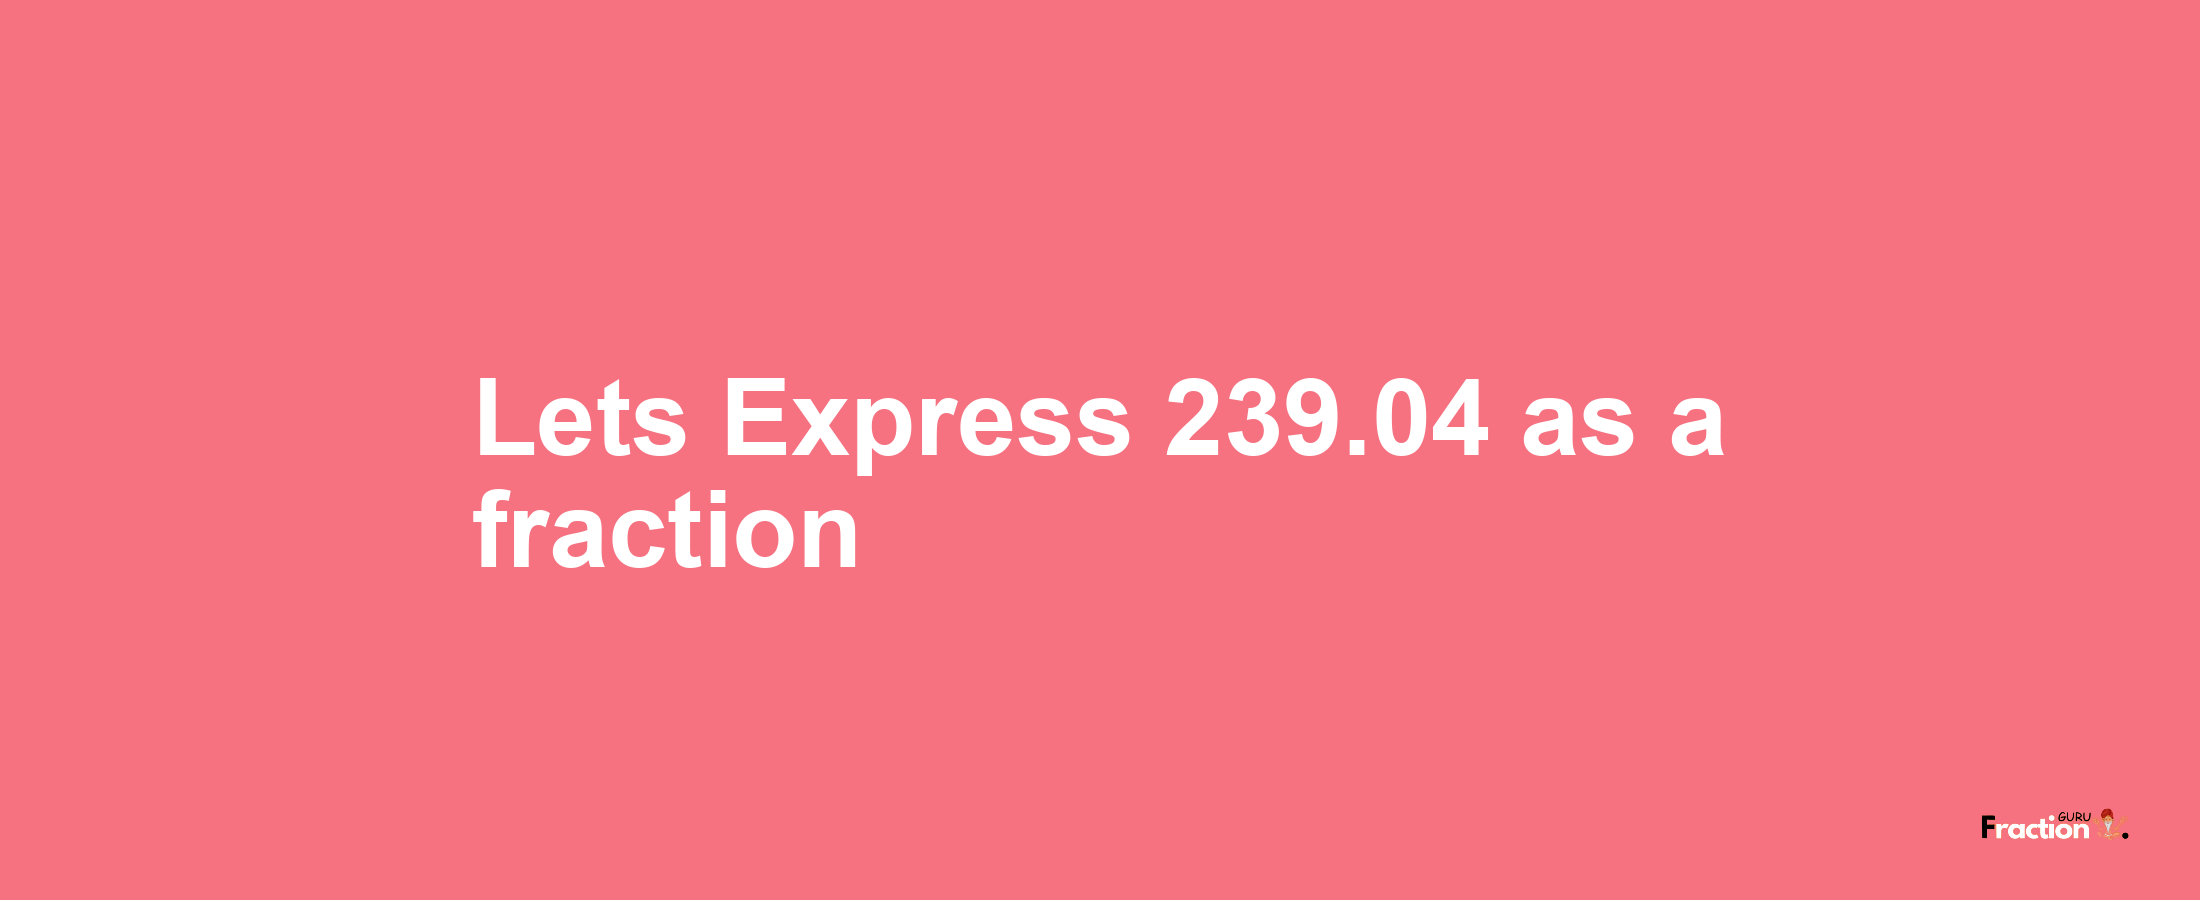 Lets Express 239.04 as afraction